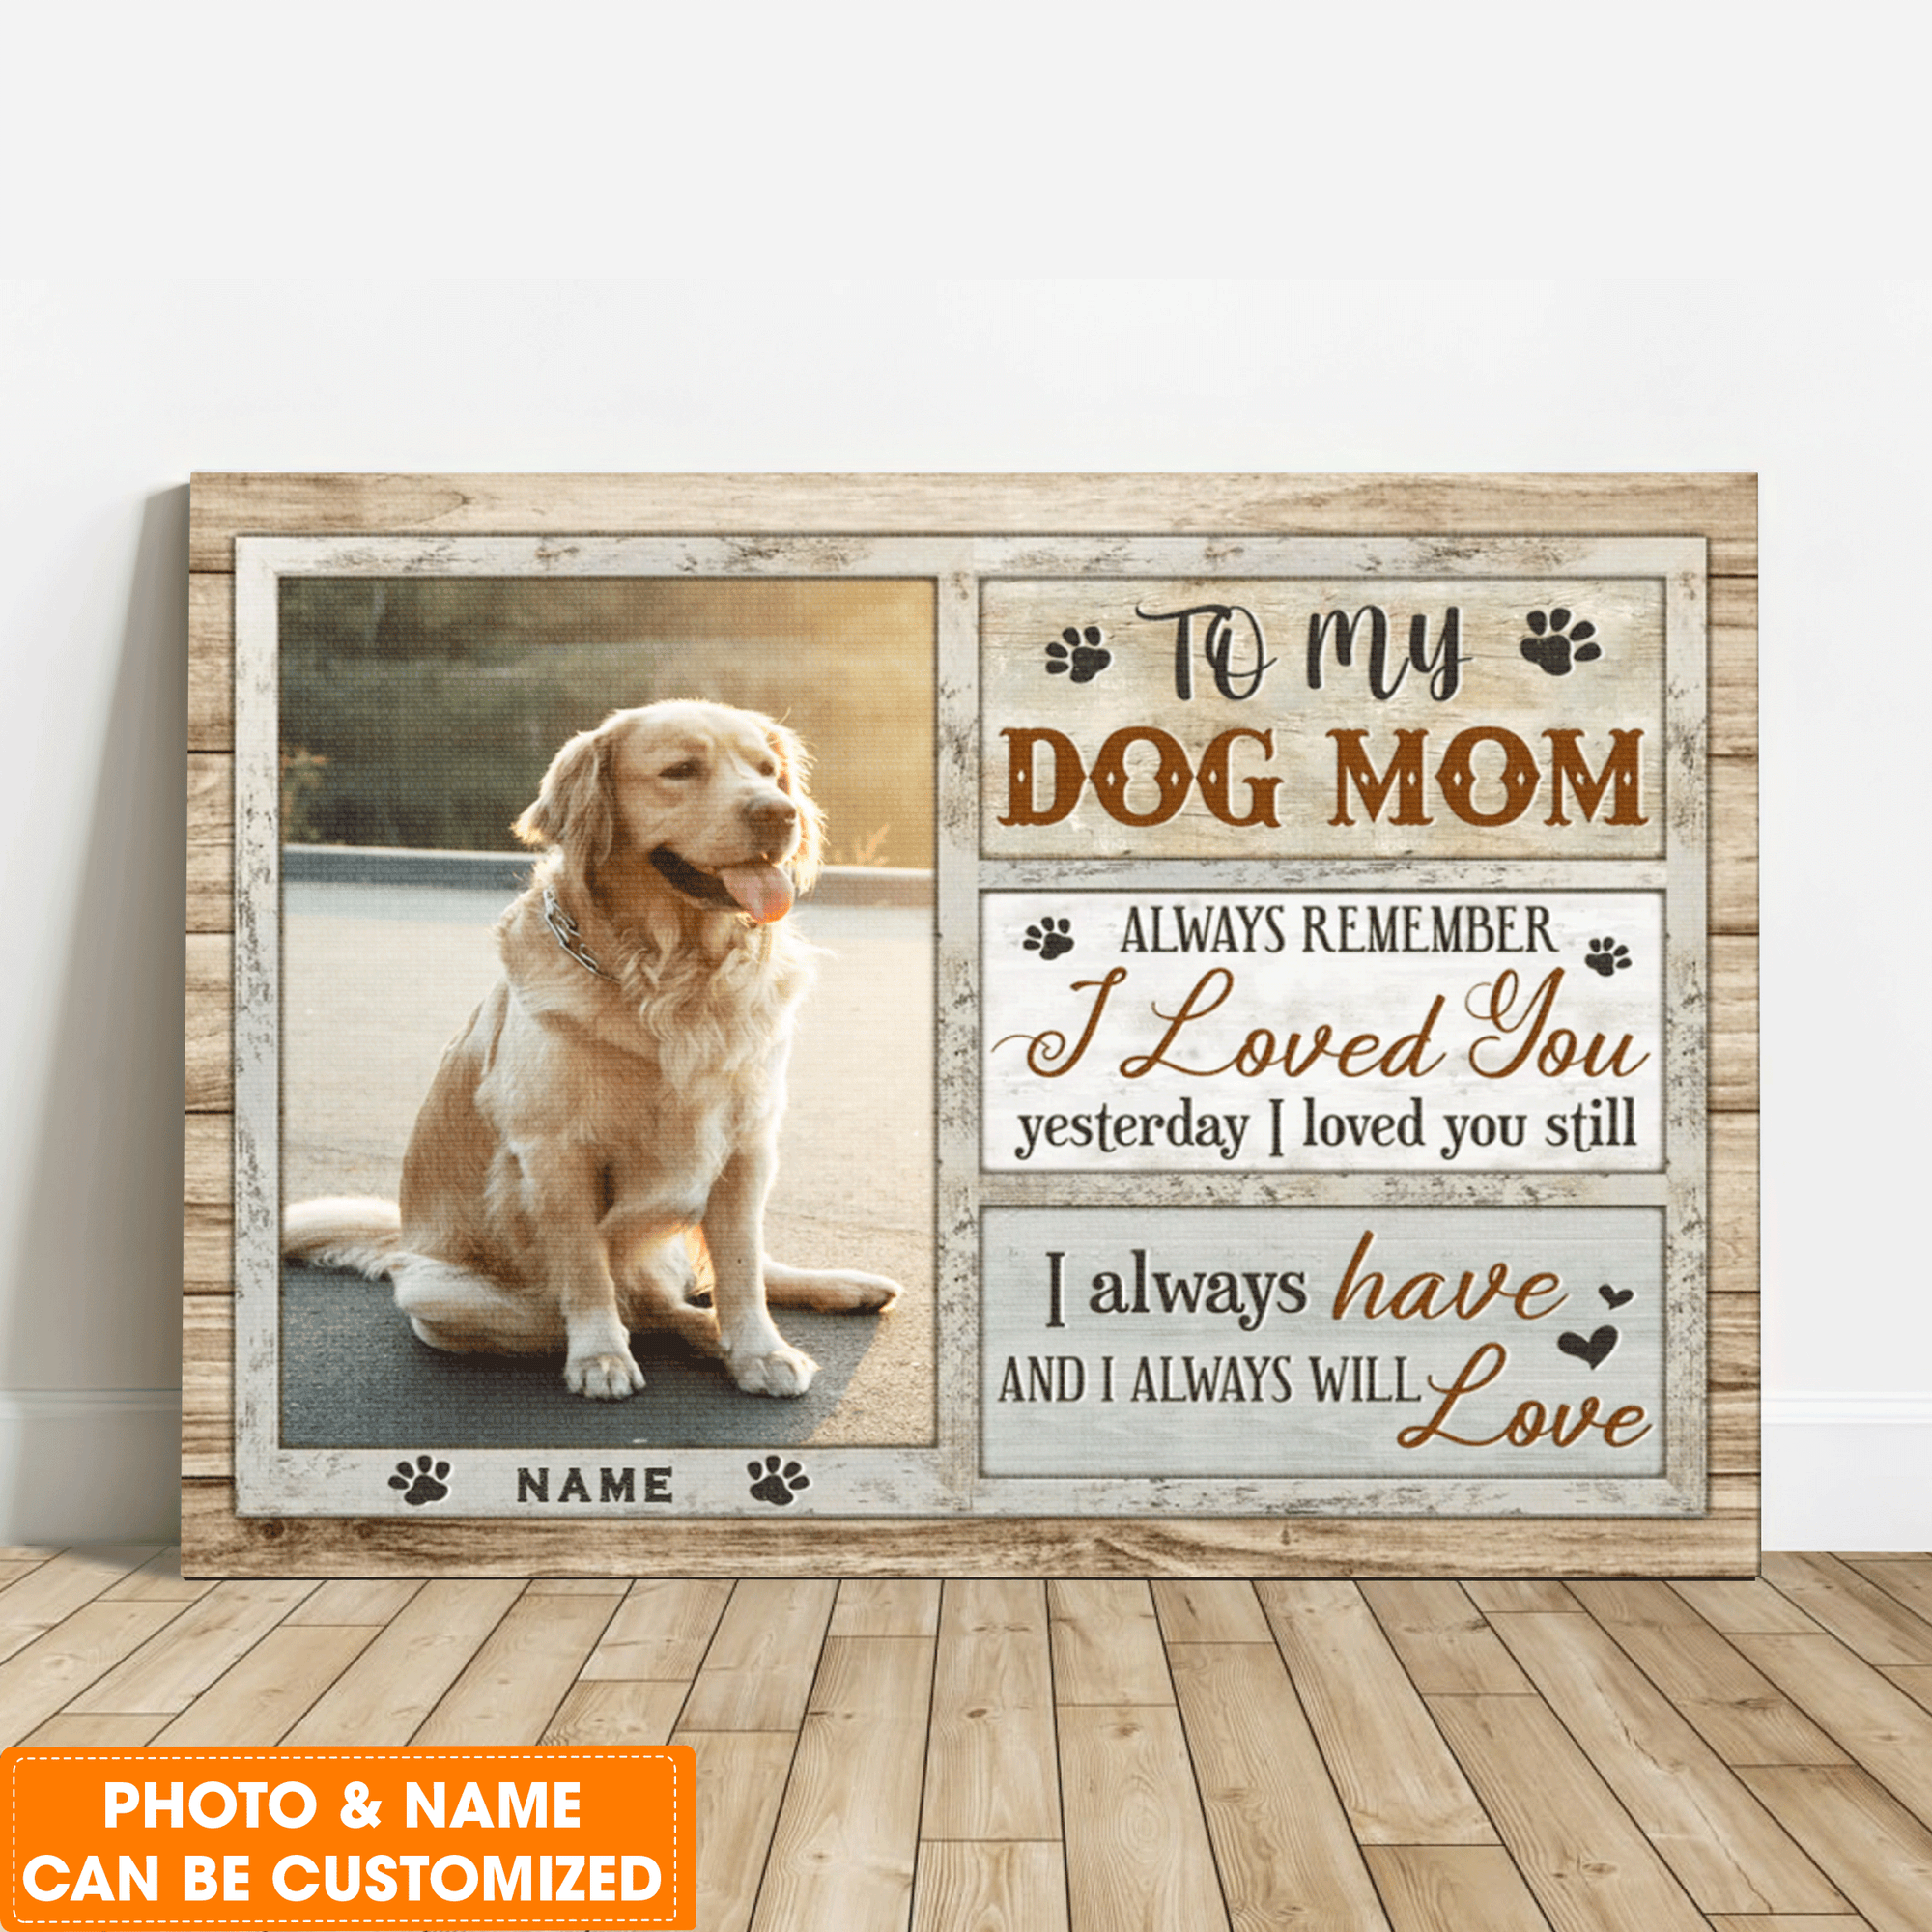 Personalized Dog Landscape Canvas, Custom Pet Photo For Dog Mom, Always Remember I Love You Canvas, Perfect Gift For Dog Lovers, Friend, Family